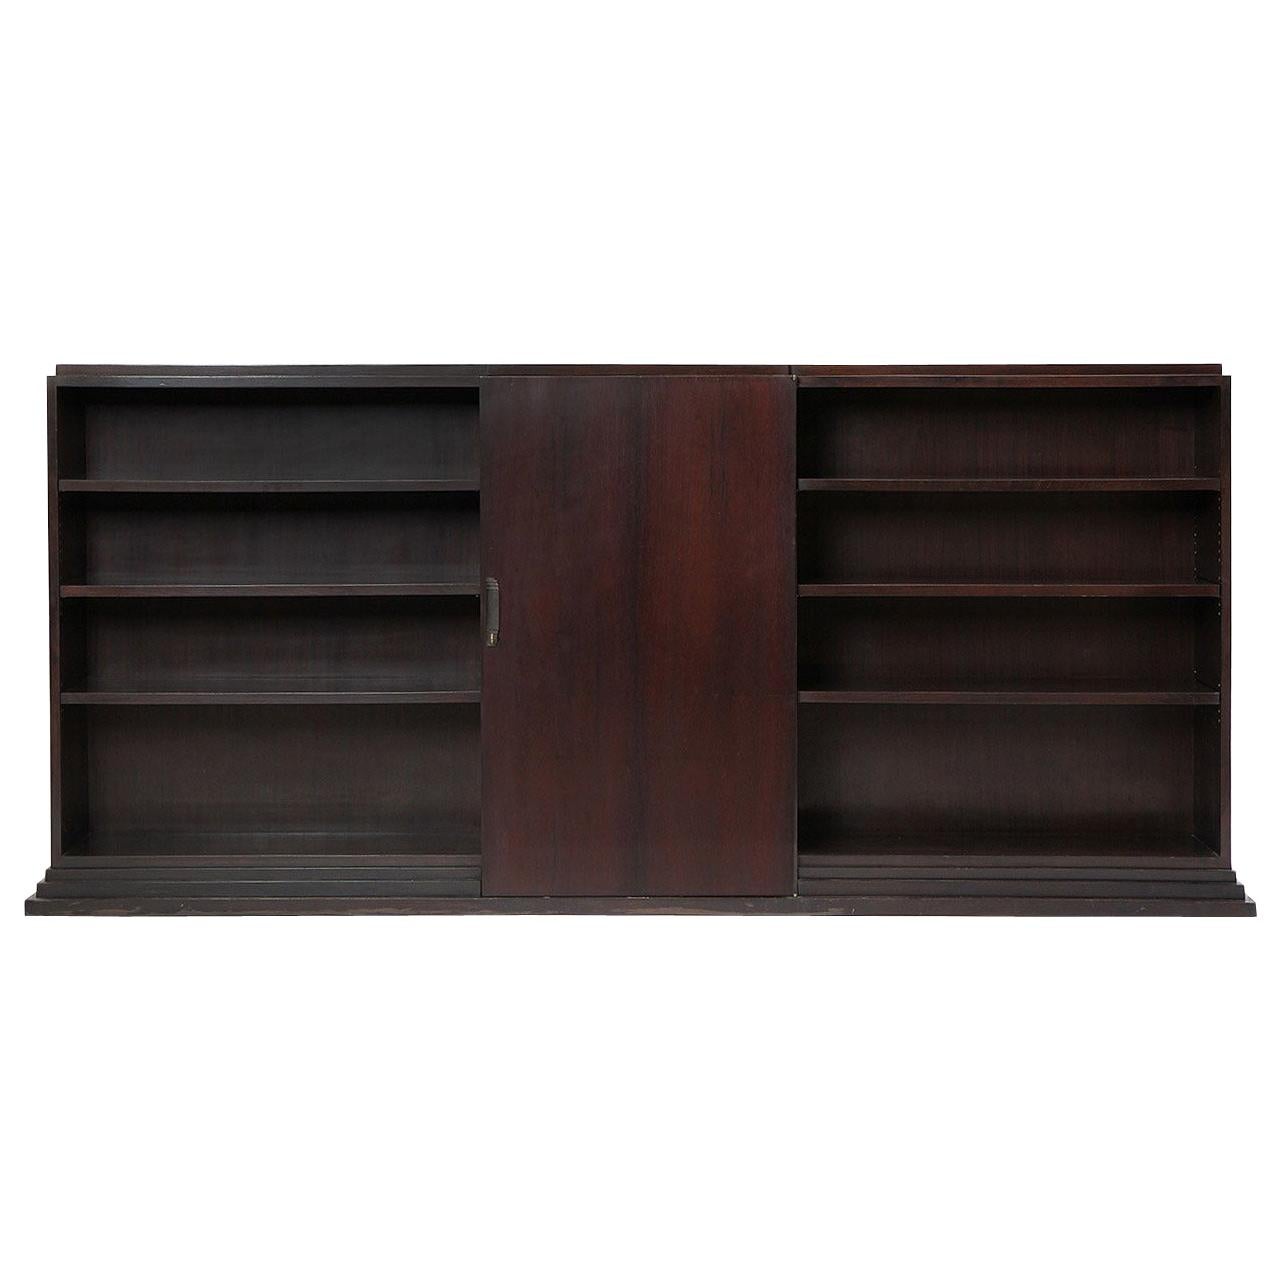 1930s Unattributed French Modernist Rosewood Bookcase